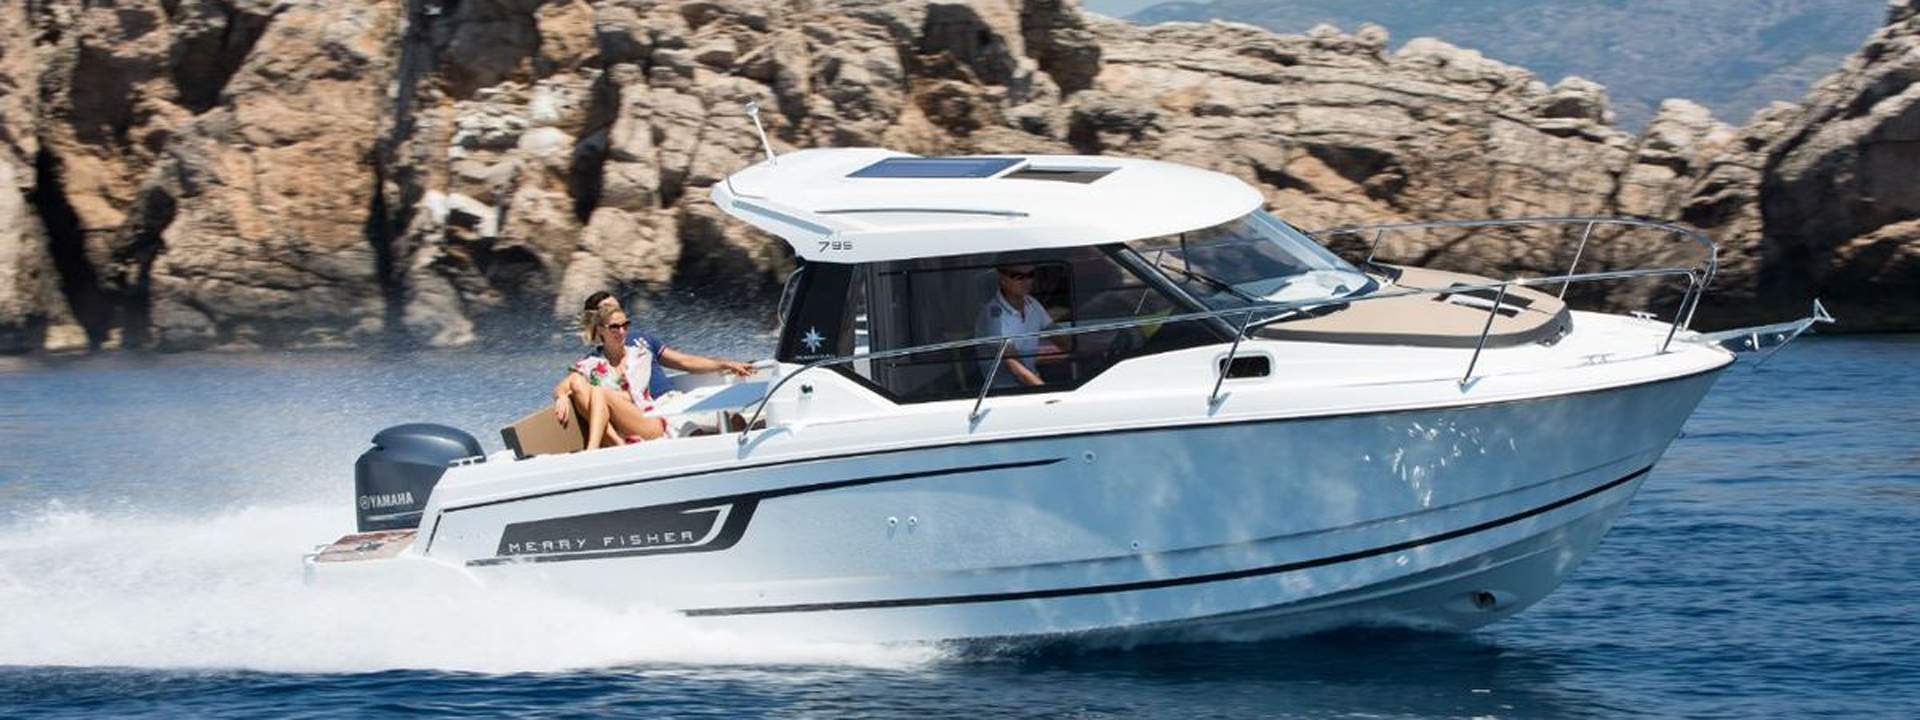 Barca a motore Merry Fisher 795